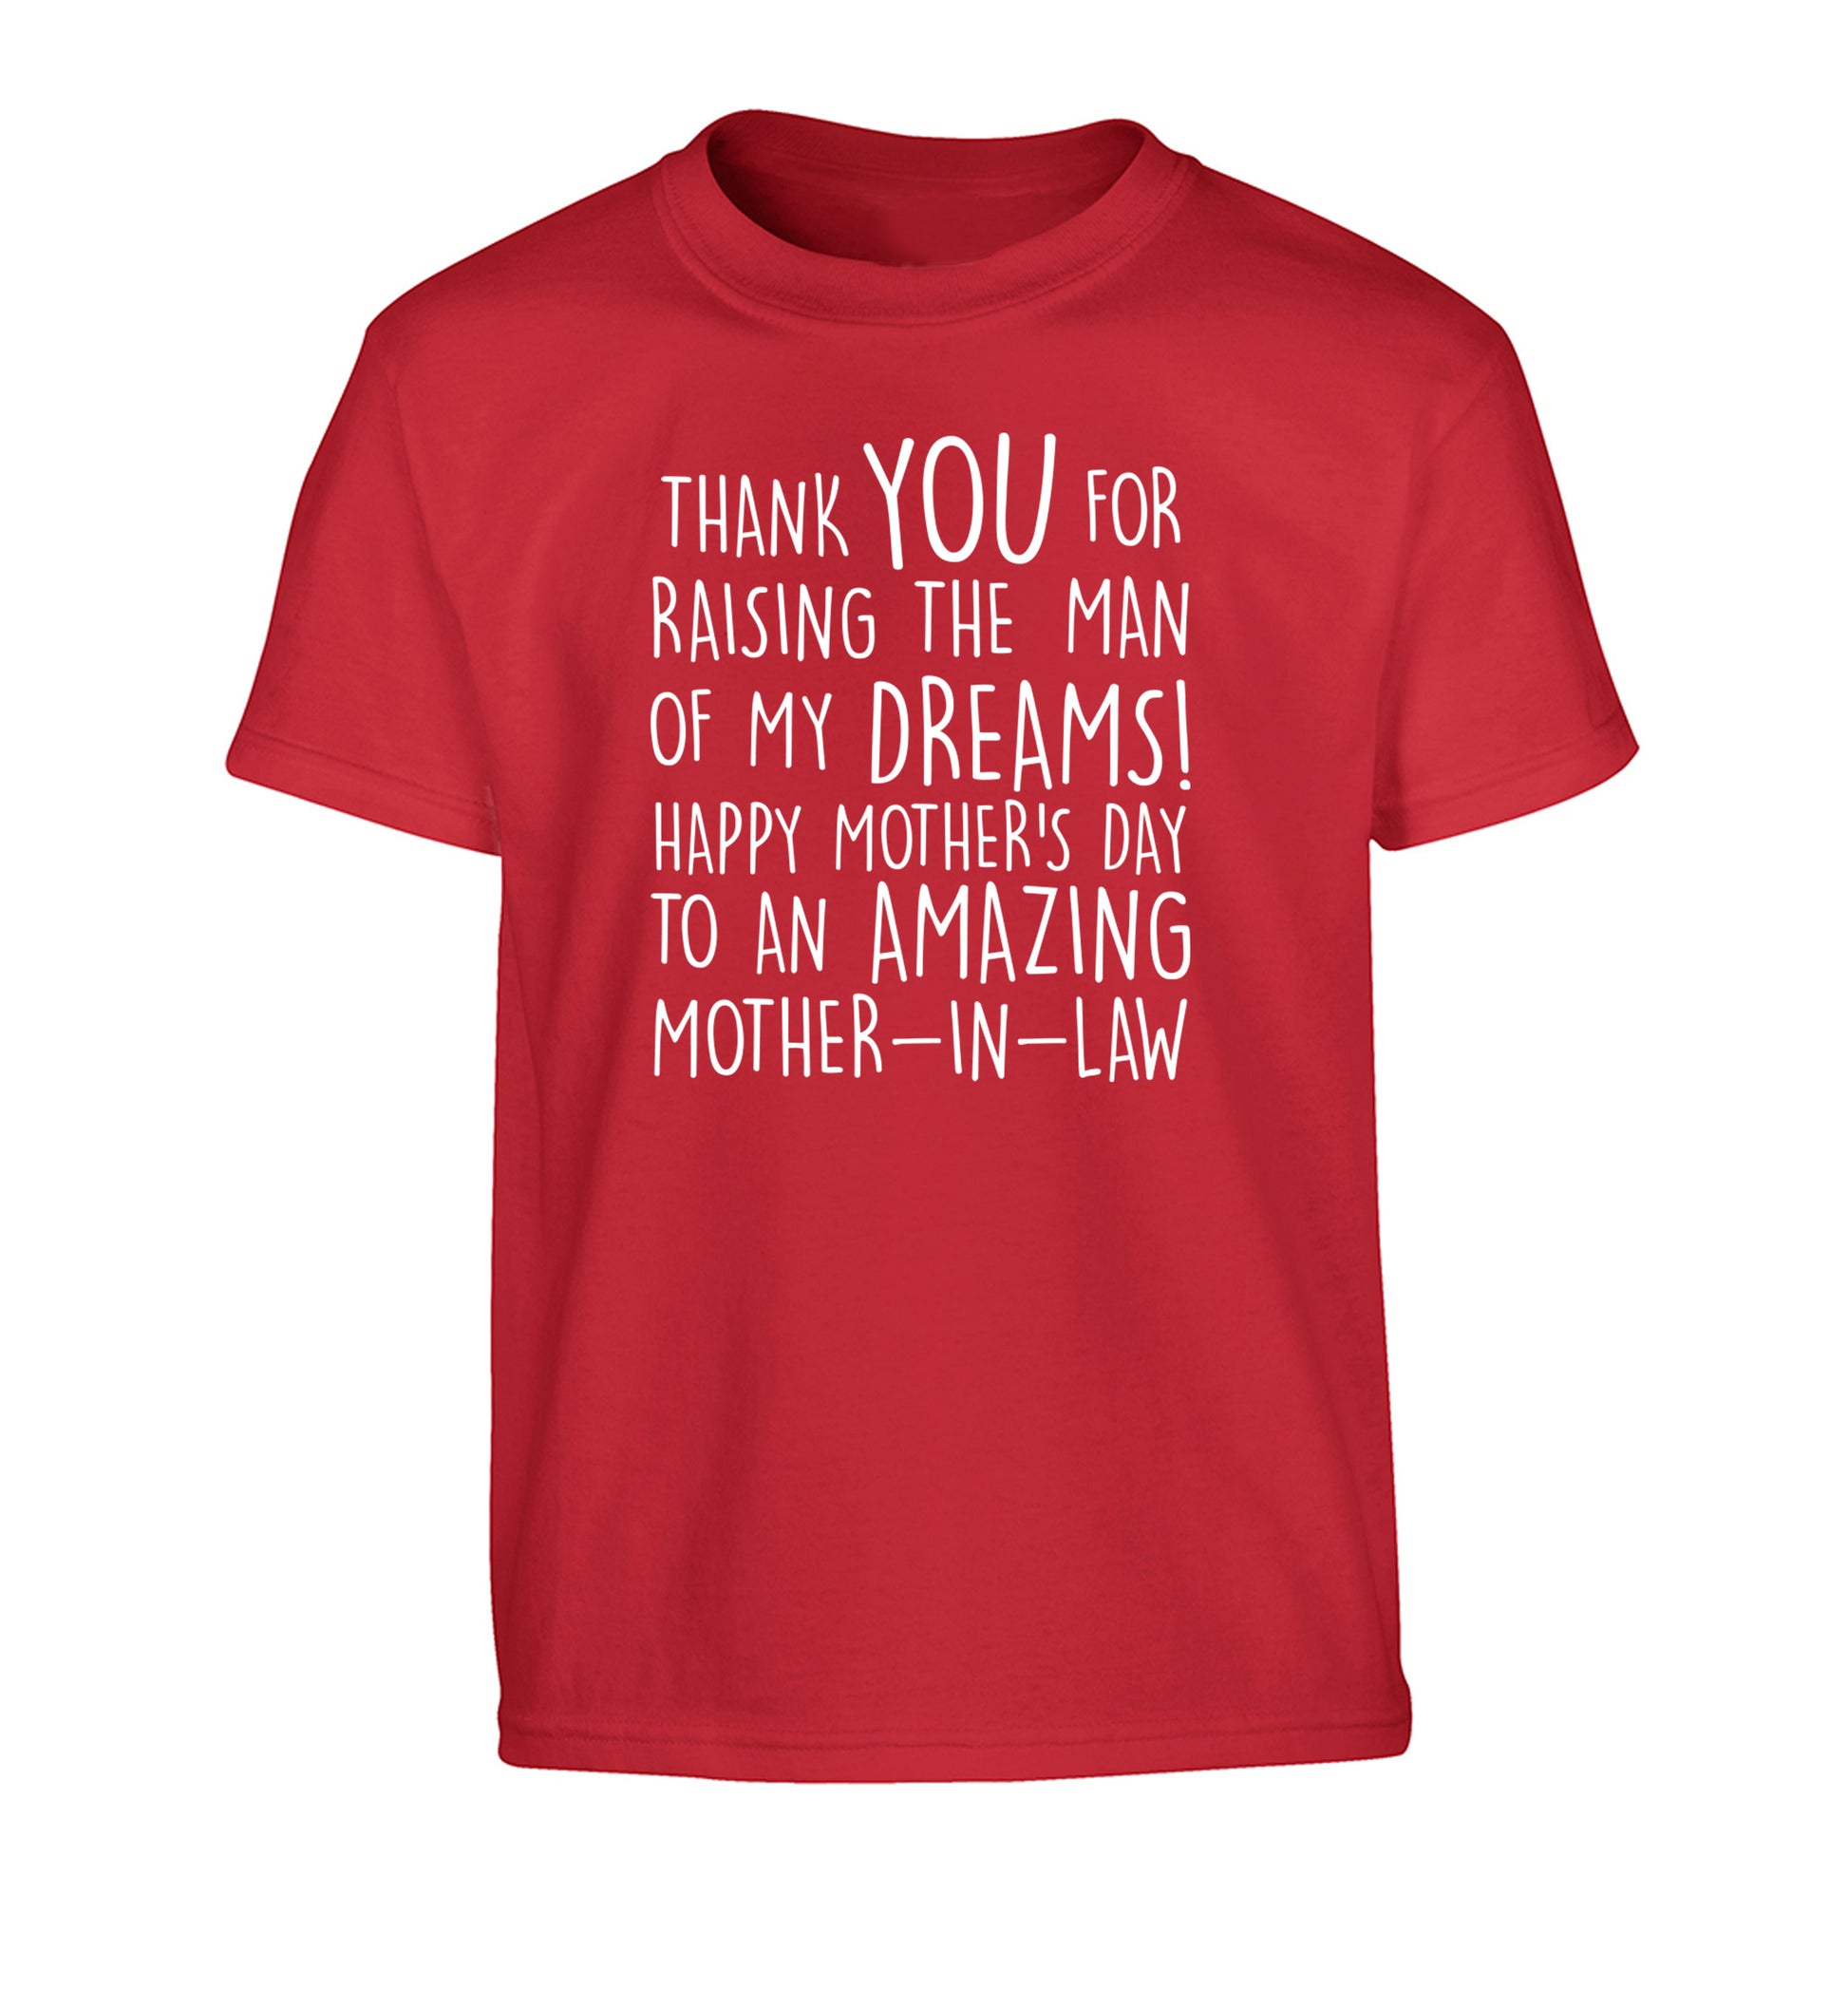 Thank you for raising the man of my dreams happy mother's day mother-in-law Children's red Tshirt 12-13 Years